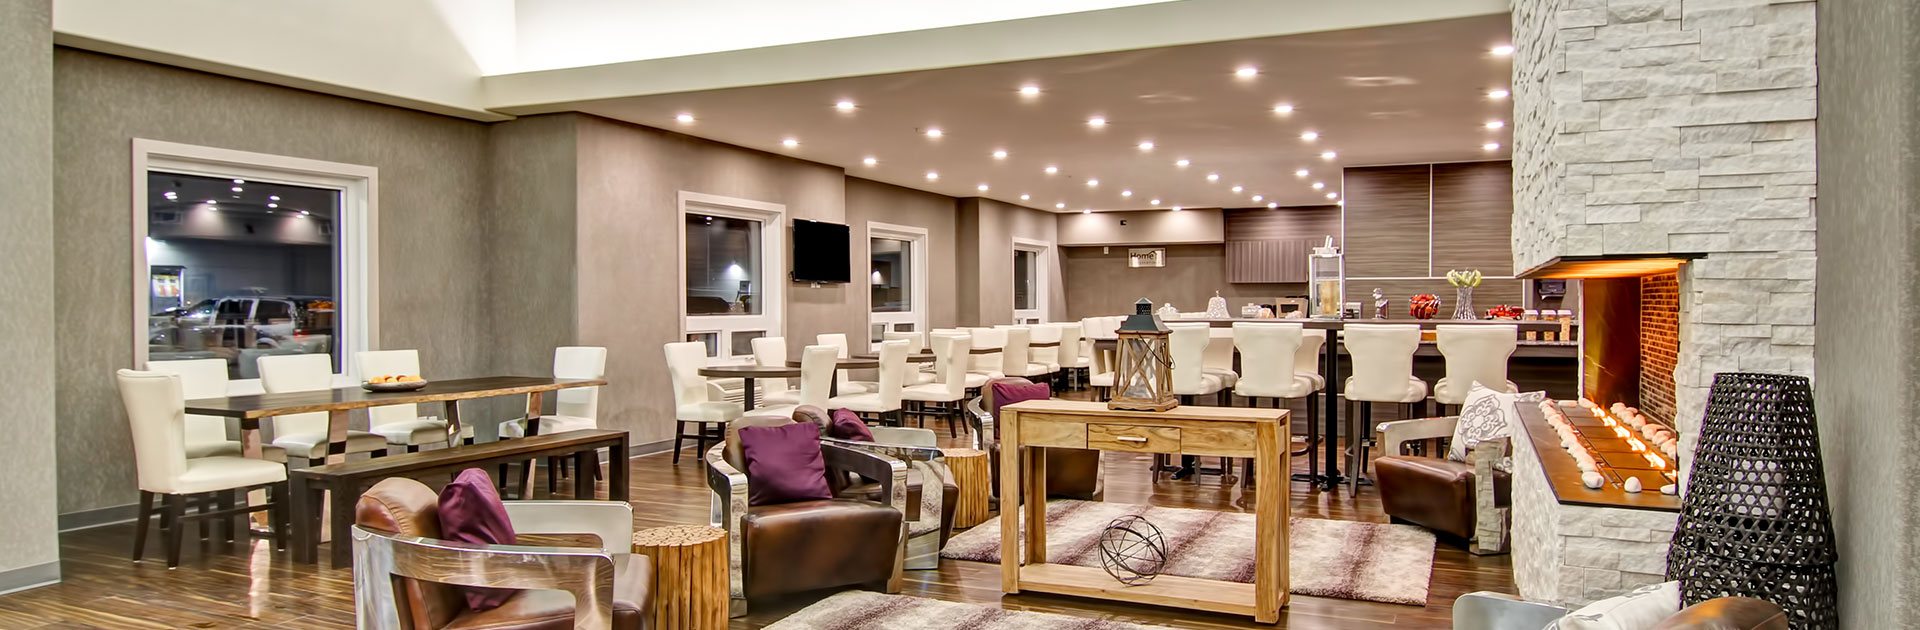 An elegantly designed eating and lounging area at a d3h managed hotel property showcases dark wood eating and dining tables encircled by white upholstered chairs and a large white stone fireplace accompanied by four leather lounge chairs.